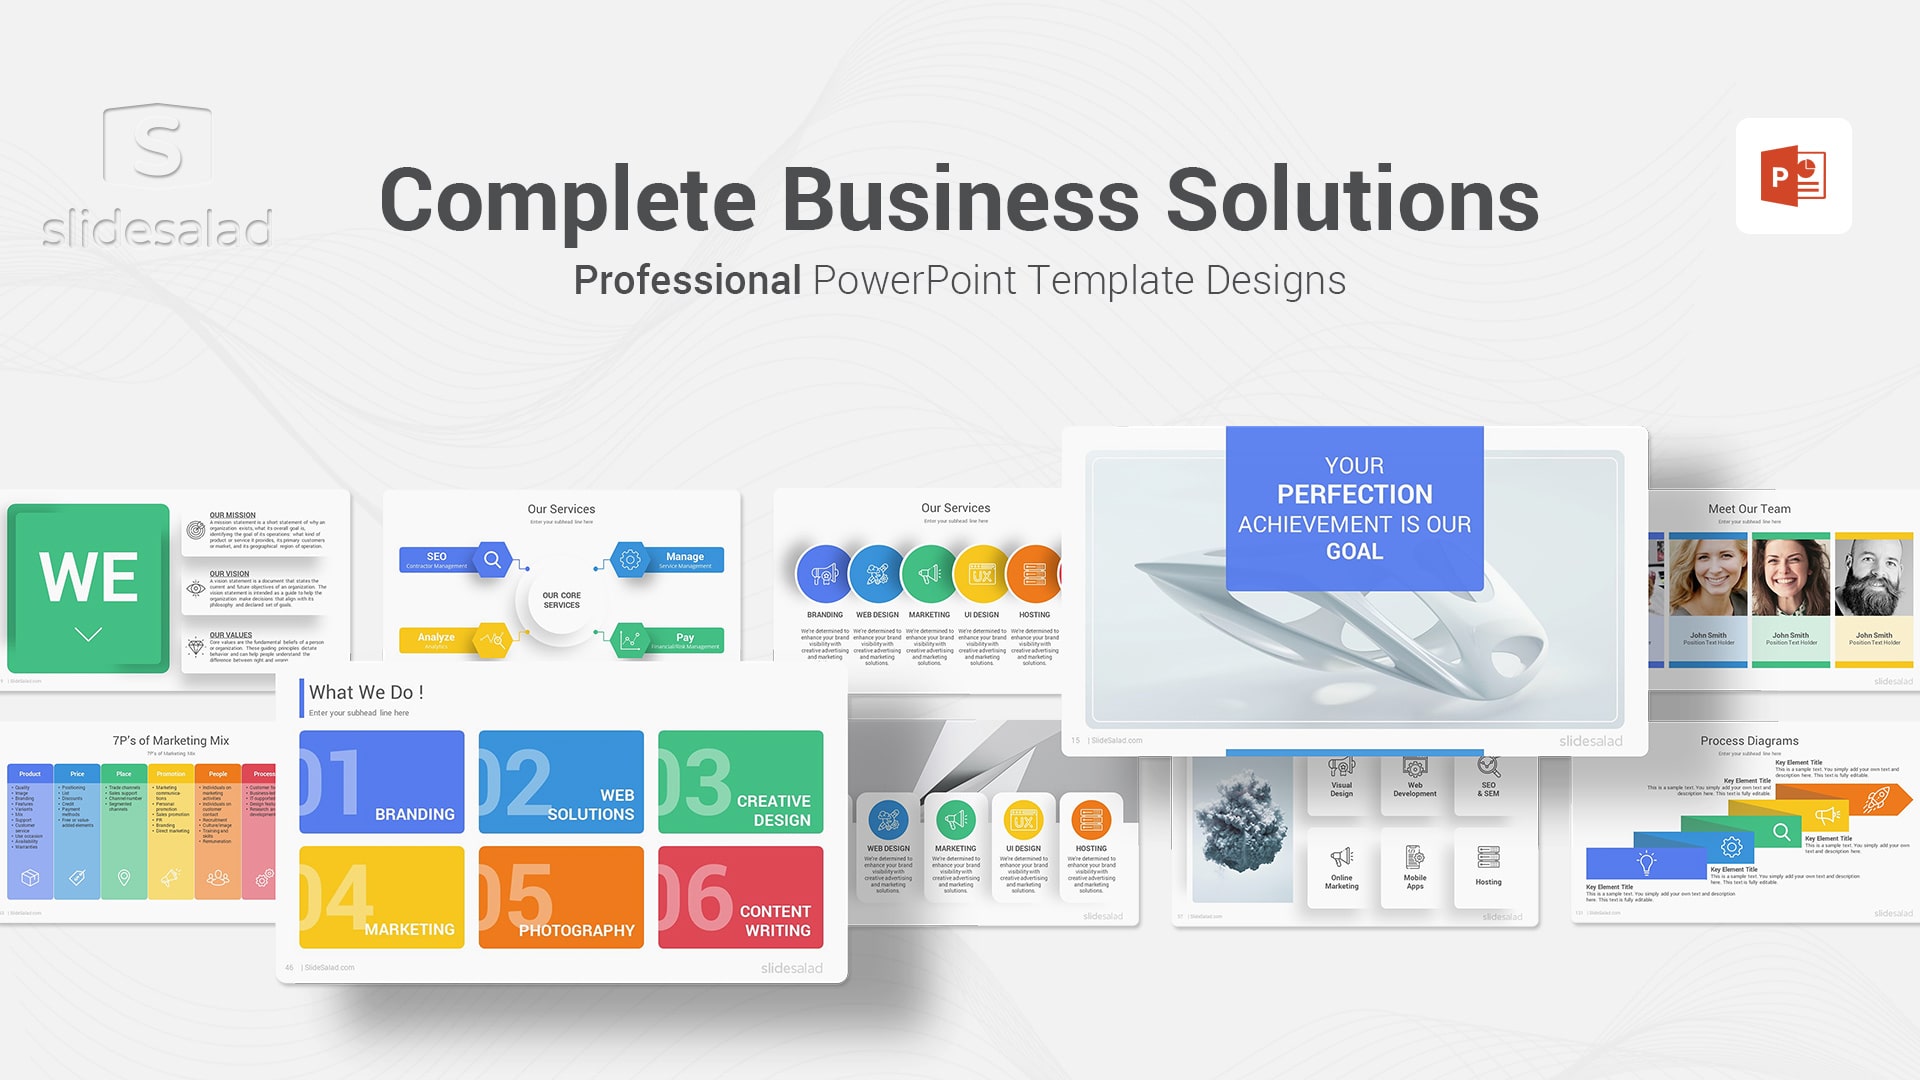 Complete Business Solutions Multipurpose PowerPoint Presentation Template